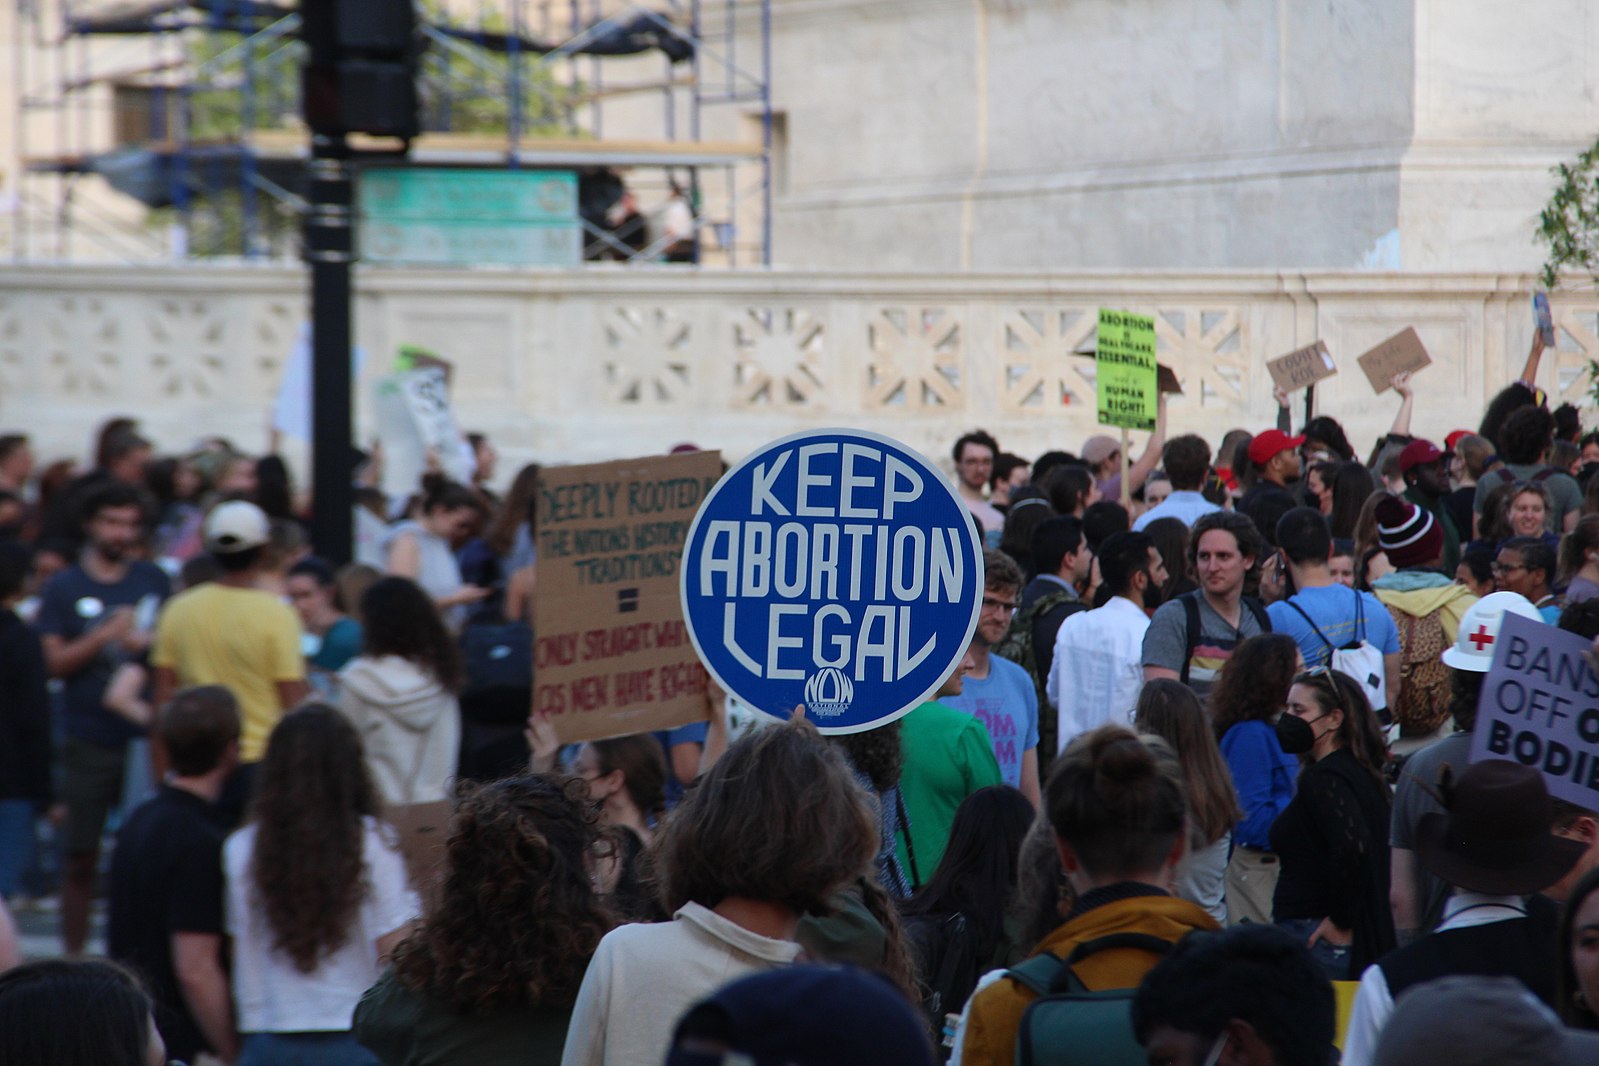 US appeals court rules to restrict use of abortion pills